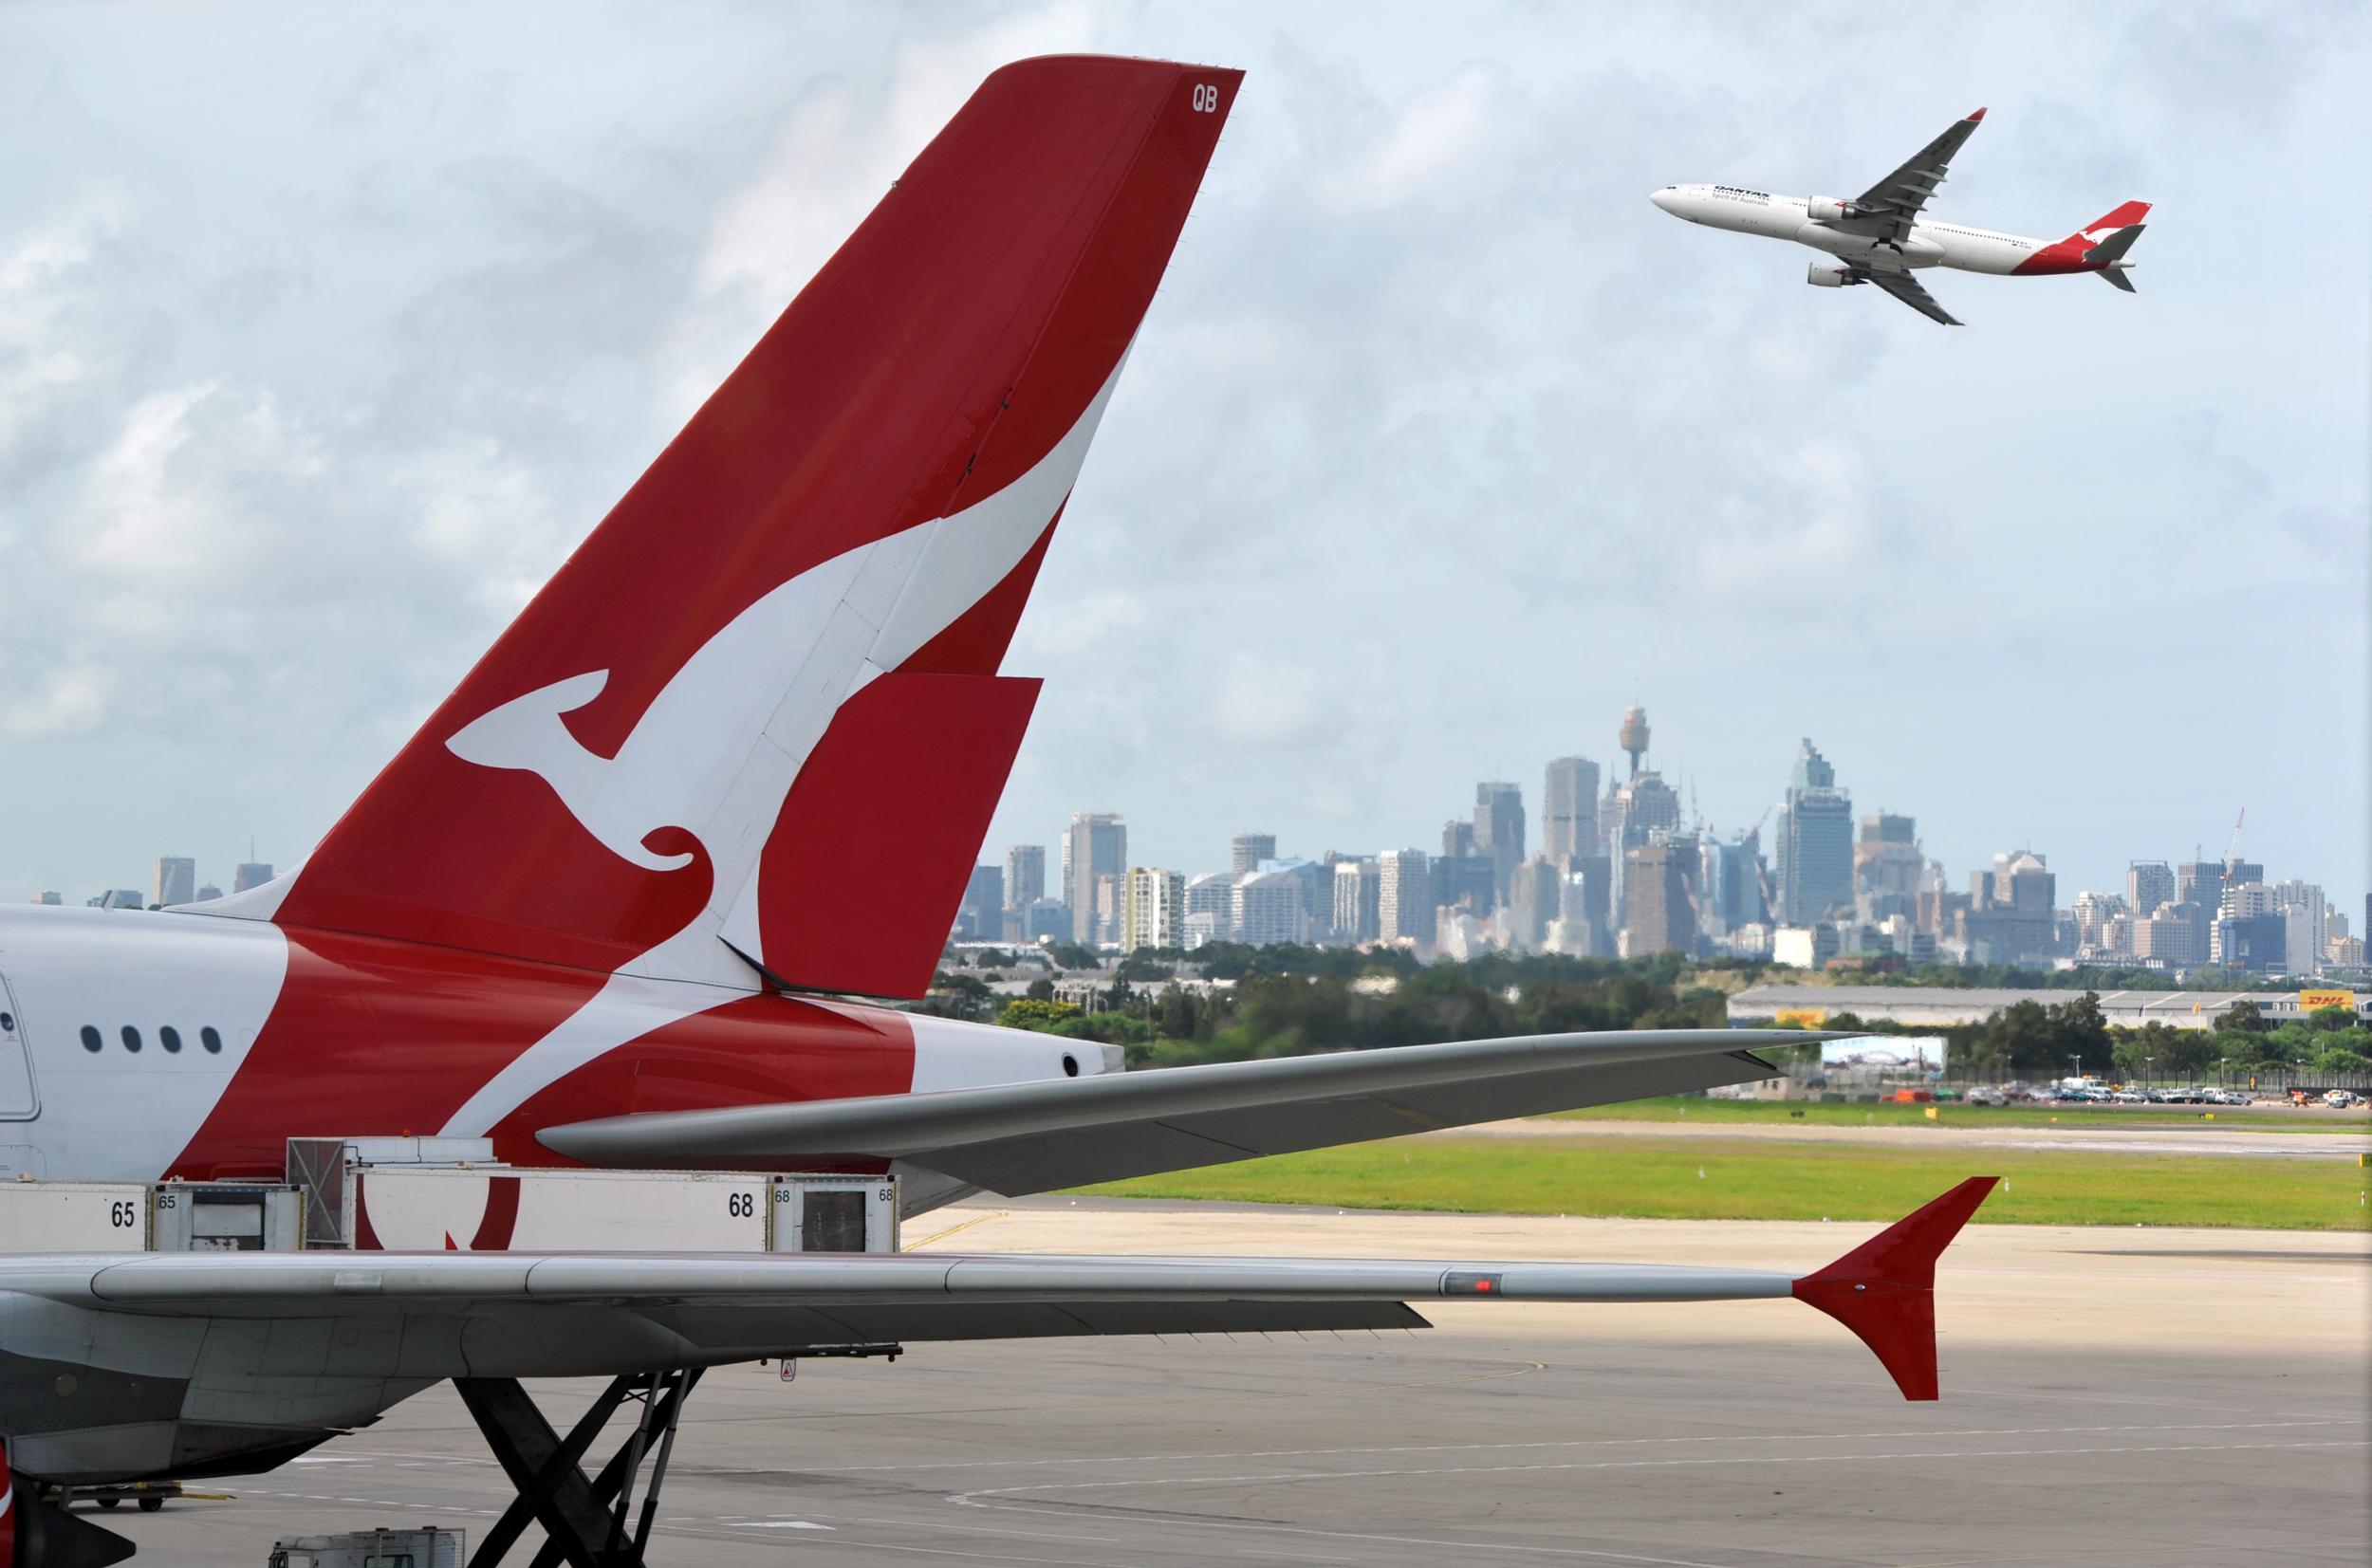 The last few years have seen The Flying Kangaroo go from strength to strength